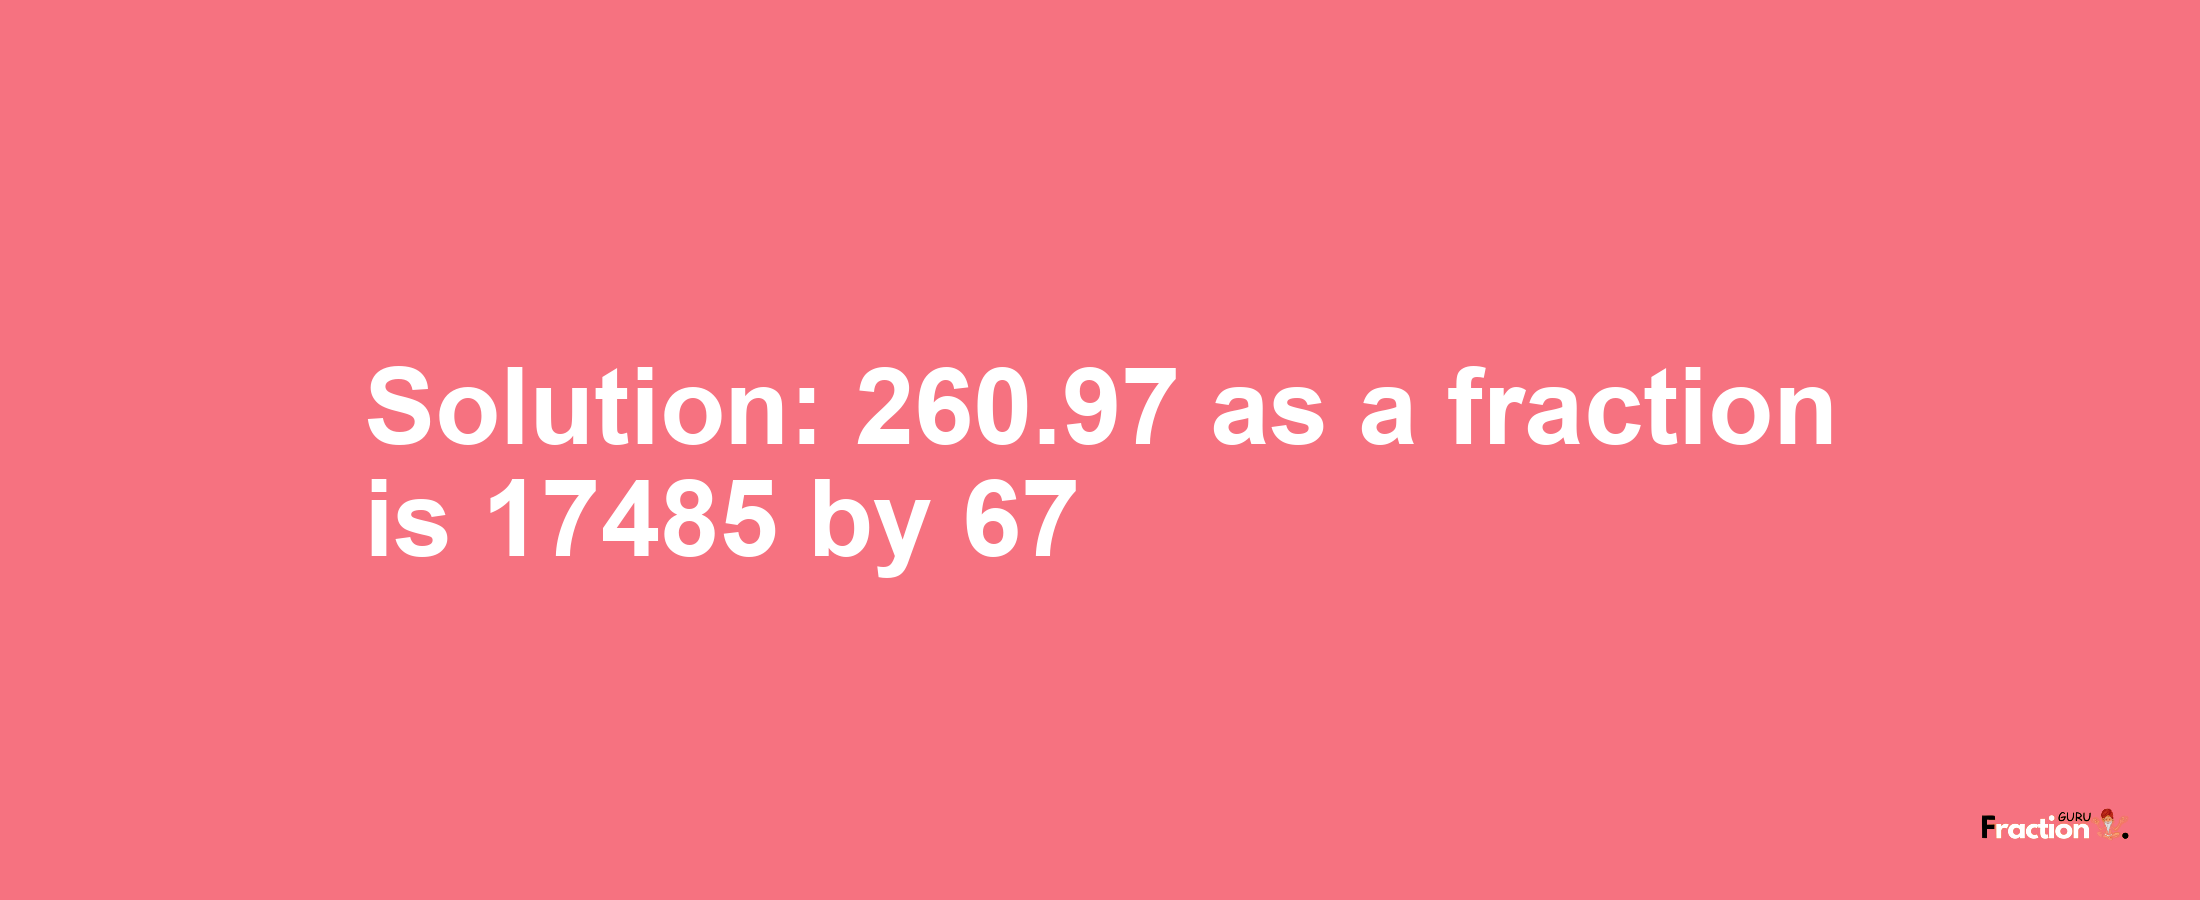 Solution:260.97 as a fraction is 17485/67